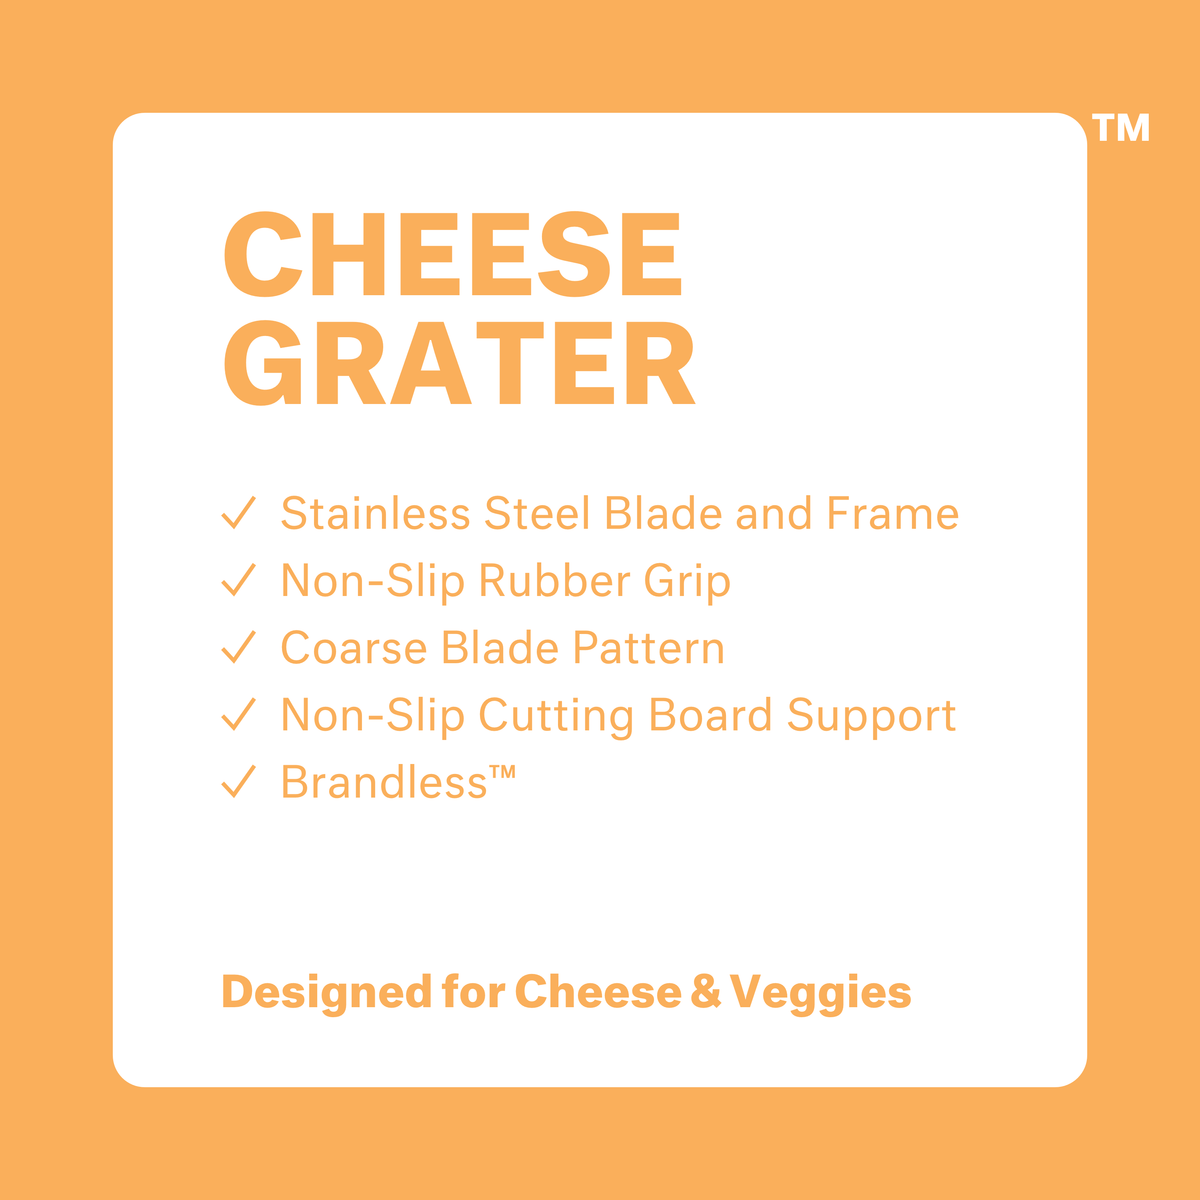 Cheese Grater: stainless steel blade and frame, non-slip rubber grip, coarse blade pattern, non-slip cutting board support, brandless. Designed for Cheese &amp; Veggies.